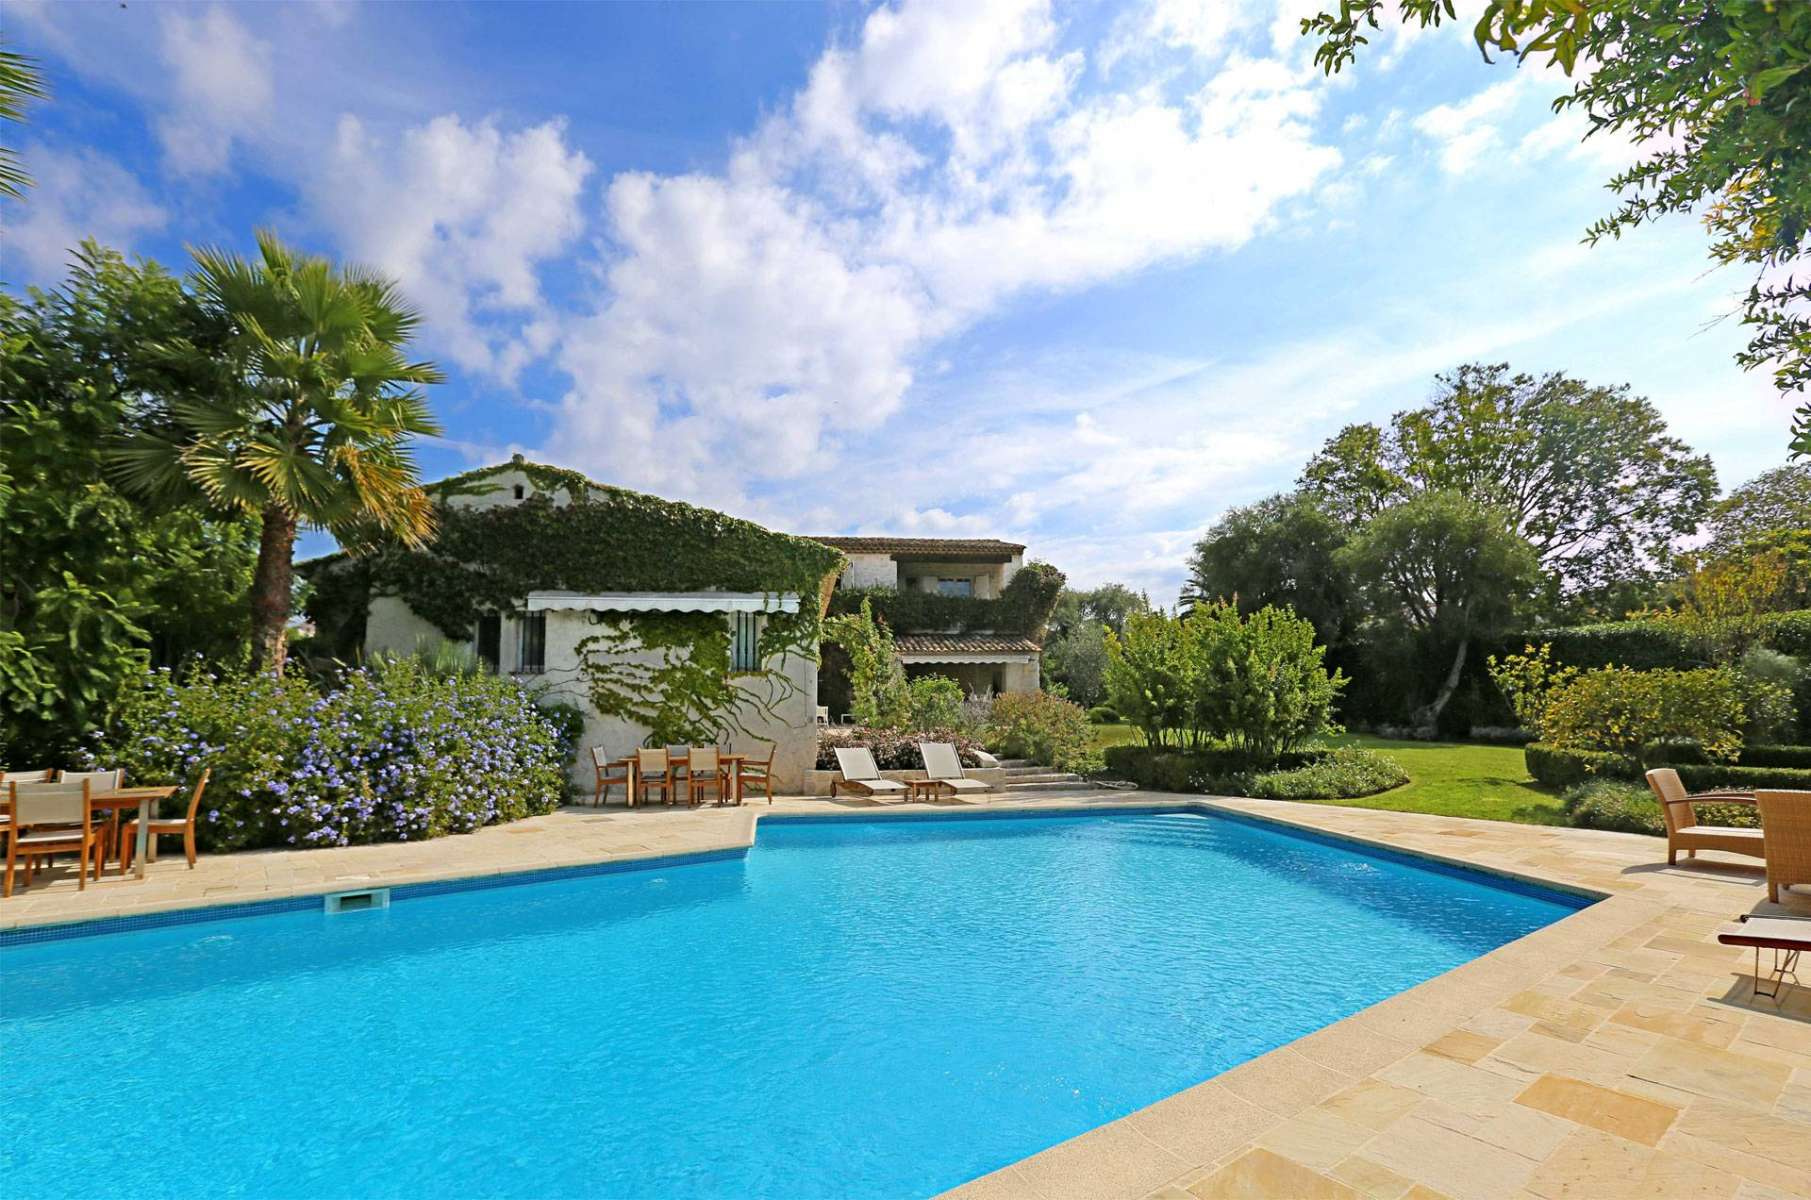 Home for sale in private domain of Cap d'Antibes